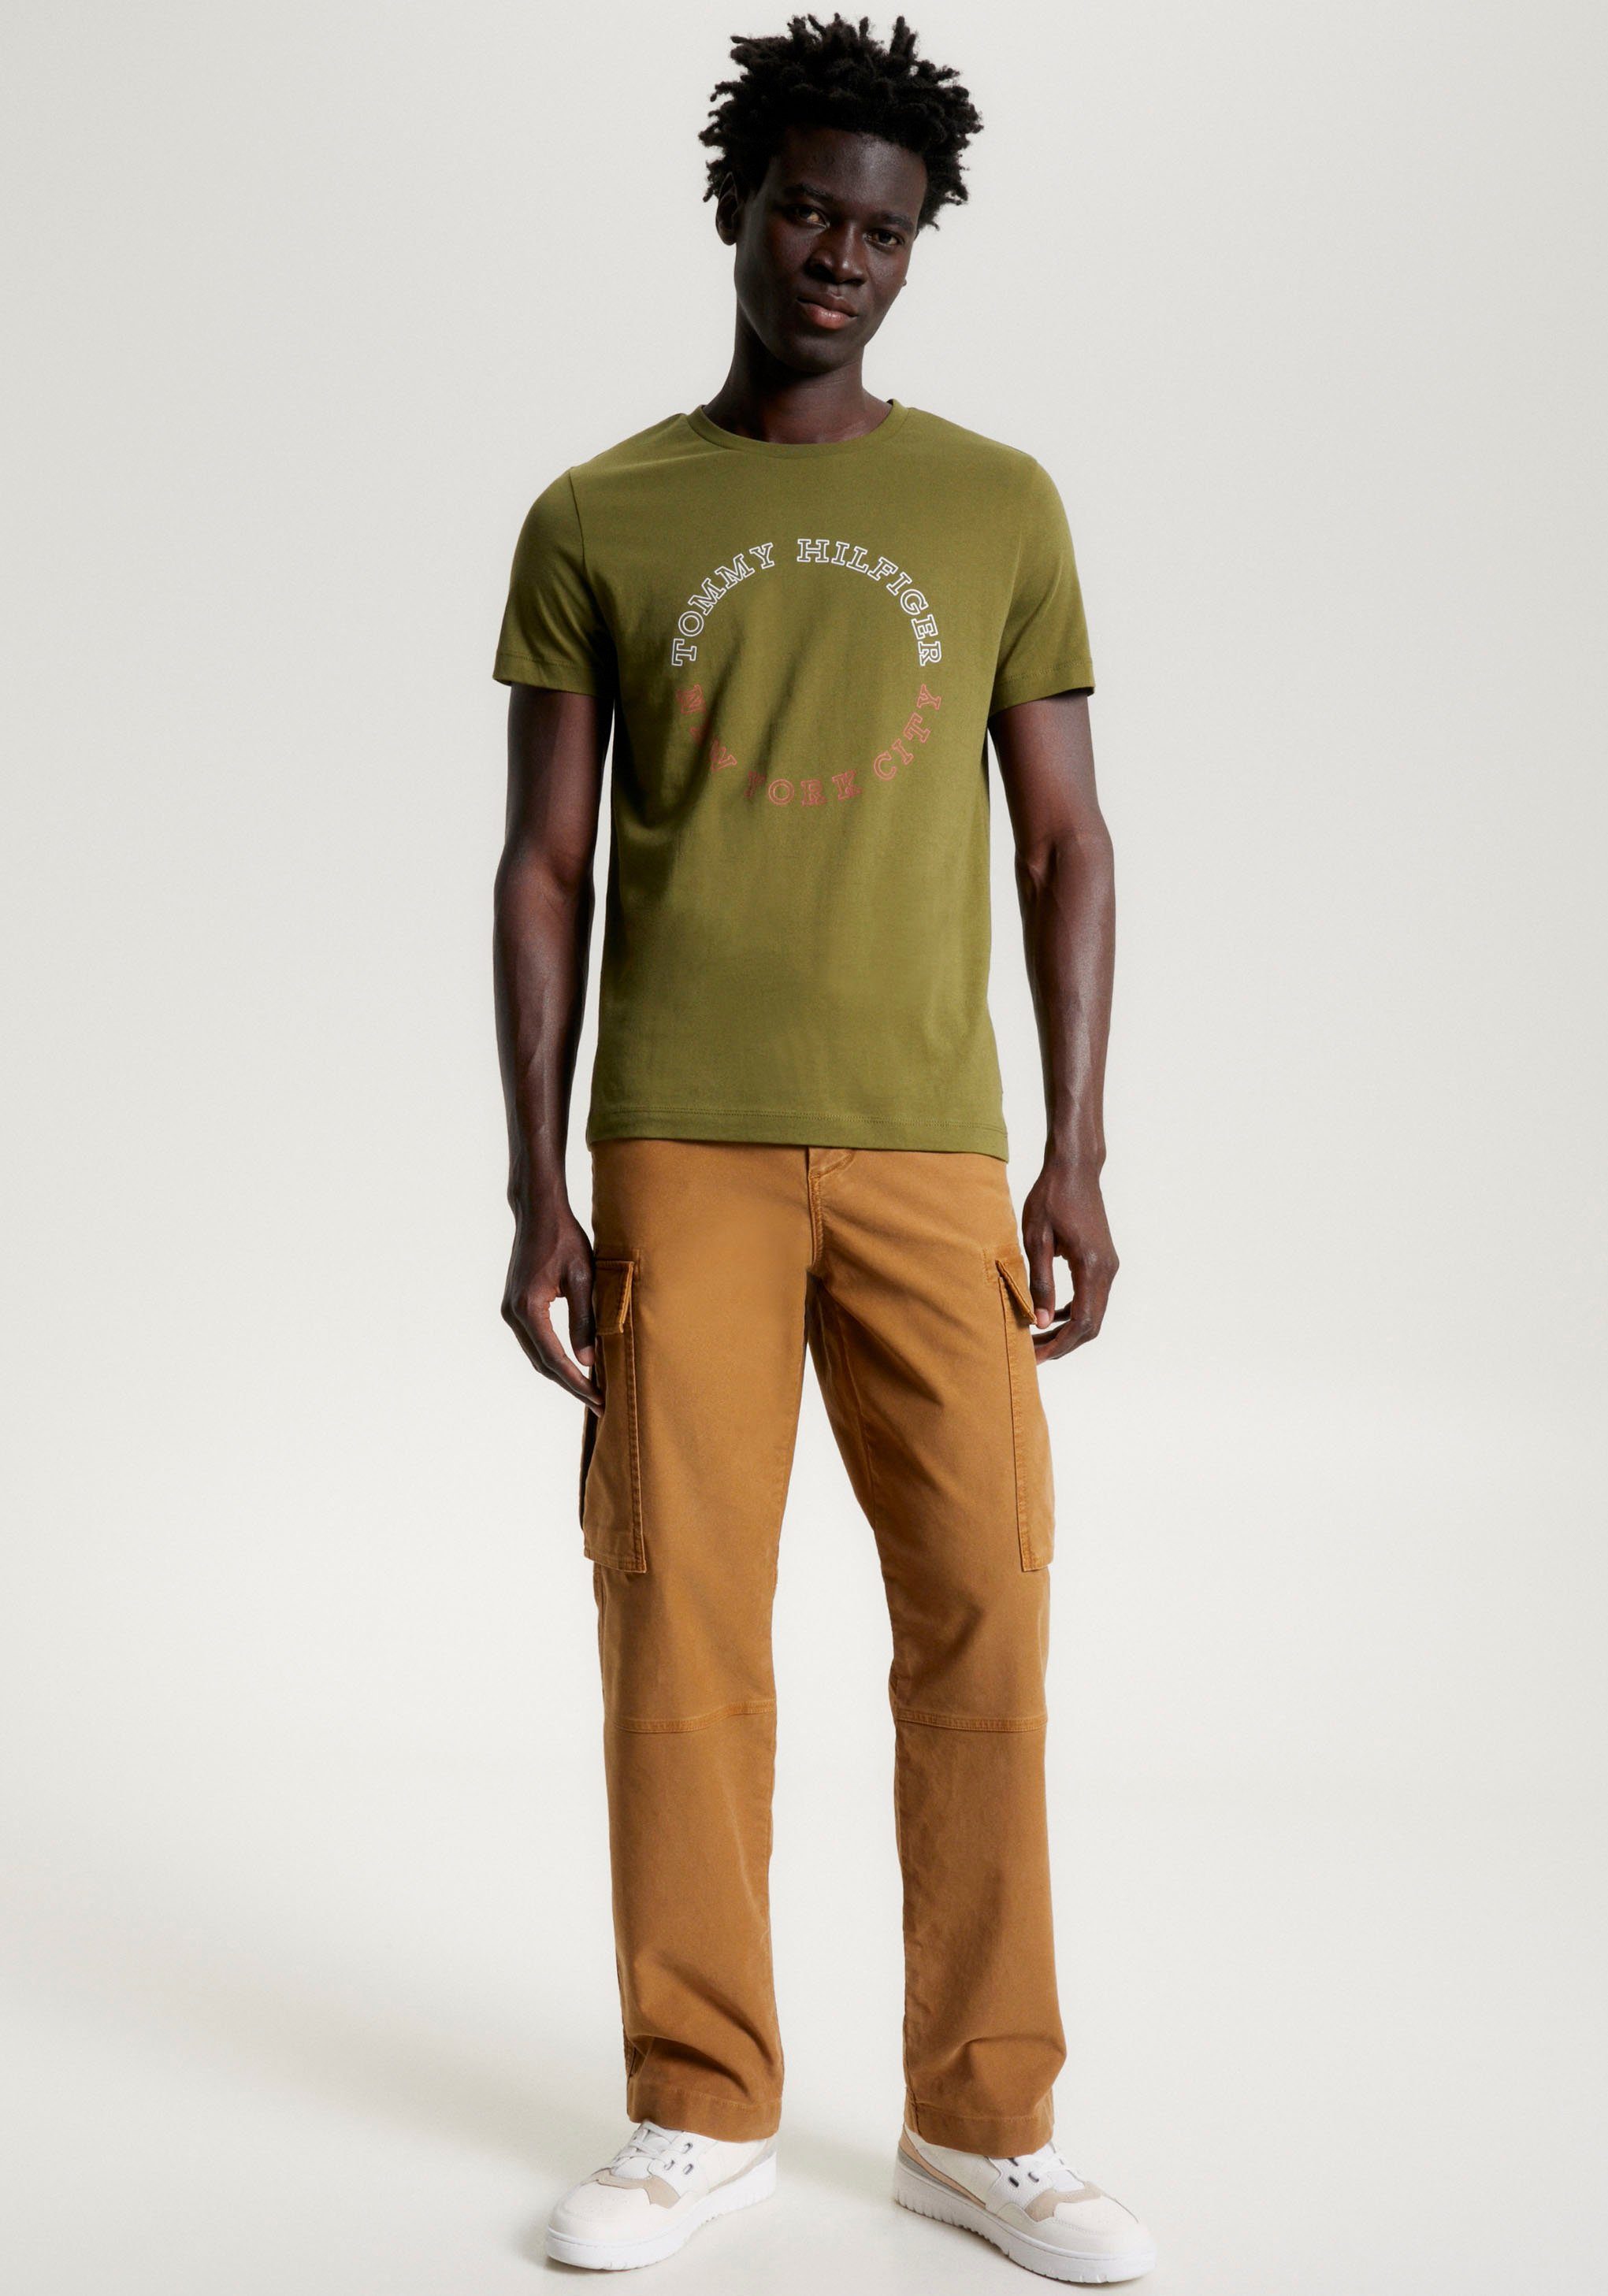 Tommy Hilfiger put.green MONOTYPE ROUNDLE T-Shirt TEE